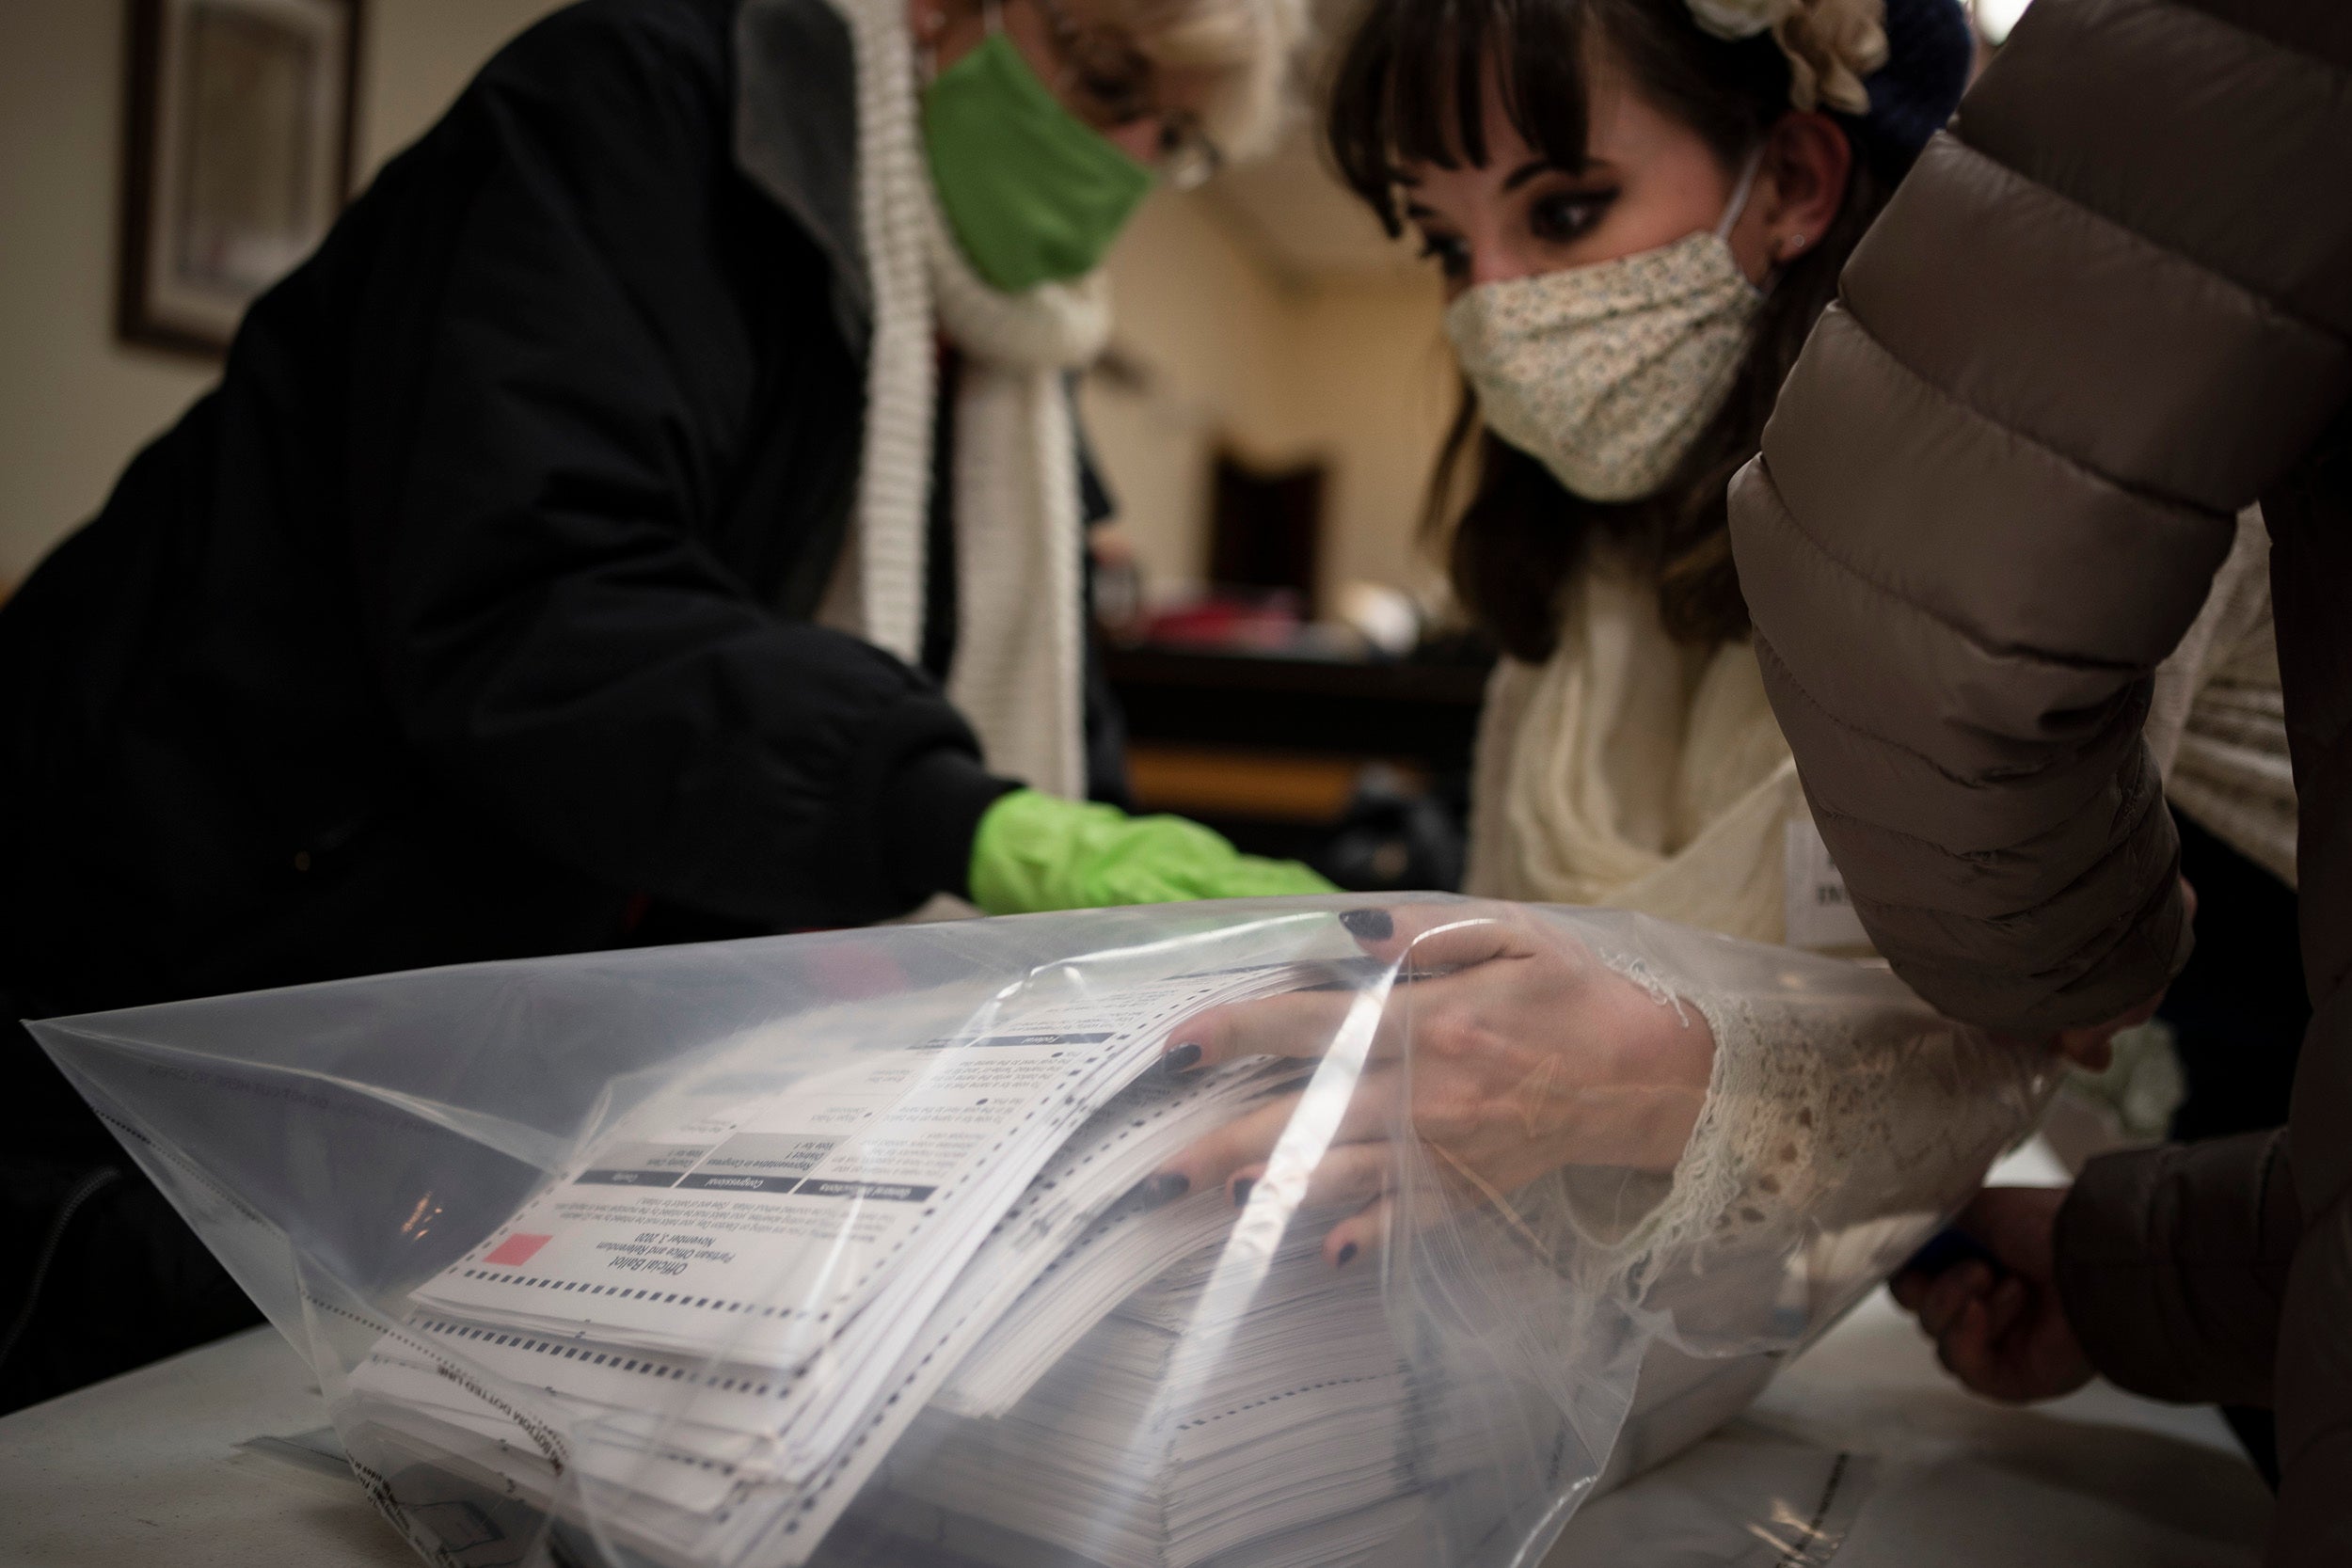 Election staff packing ballots.